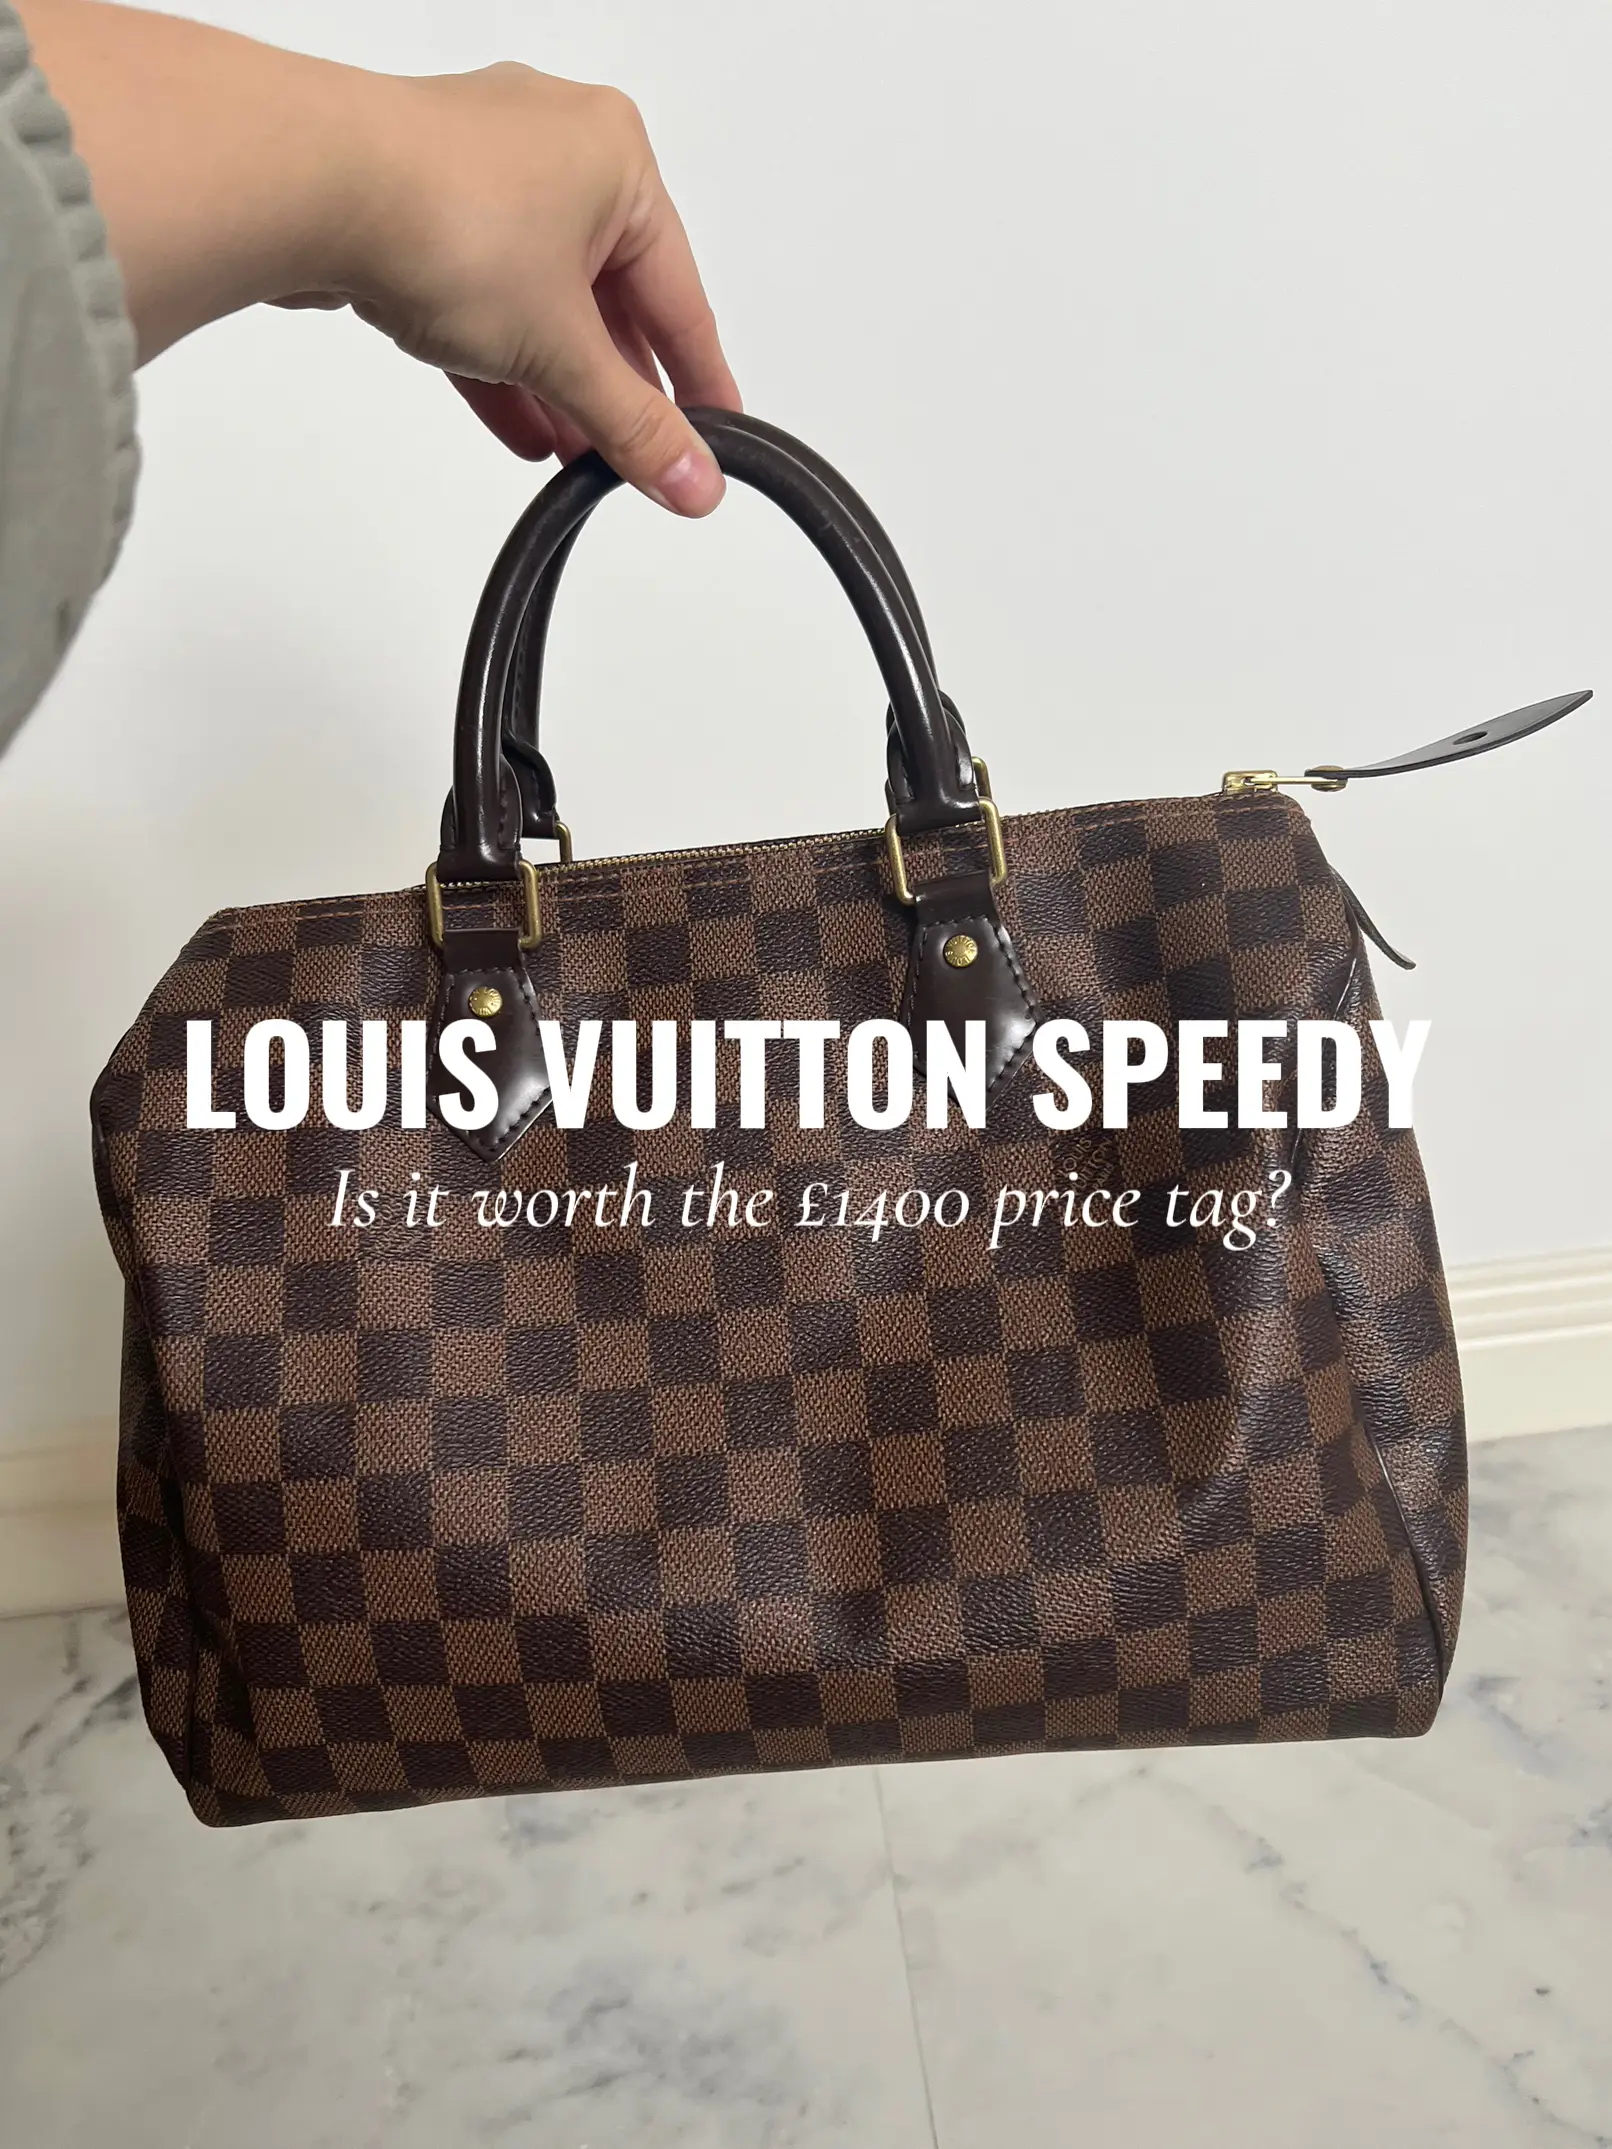 Is Louis Vuitton worth the £1400 price tag? 💰, Gallery posted by  Jamieamanda_x